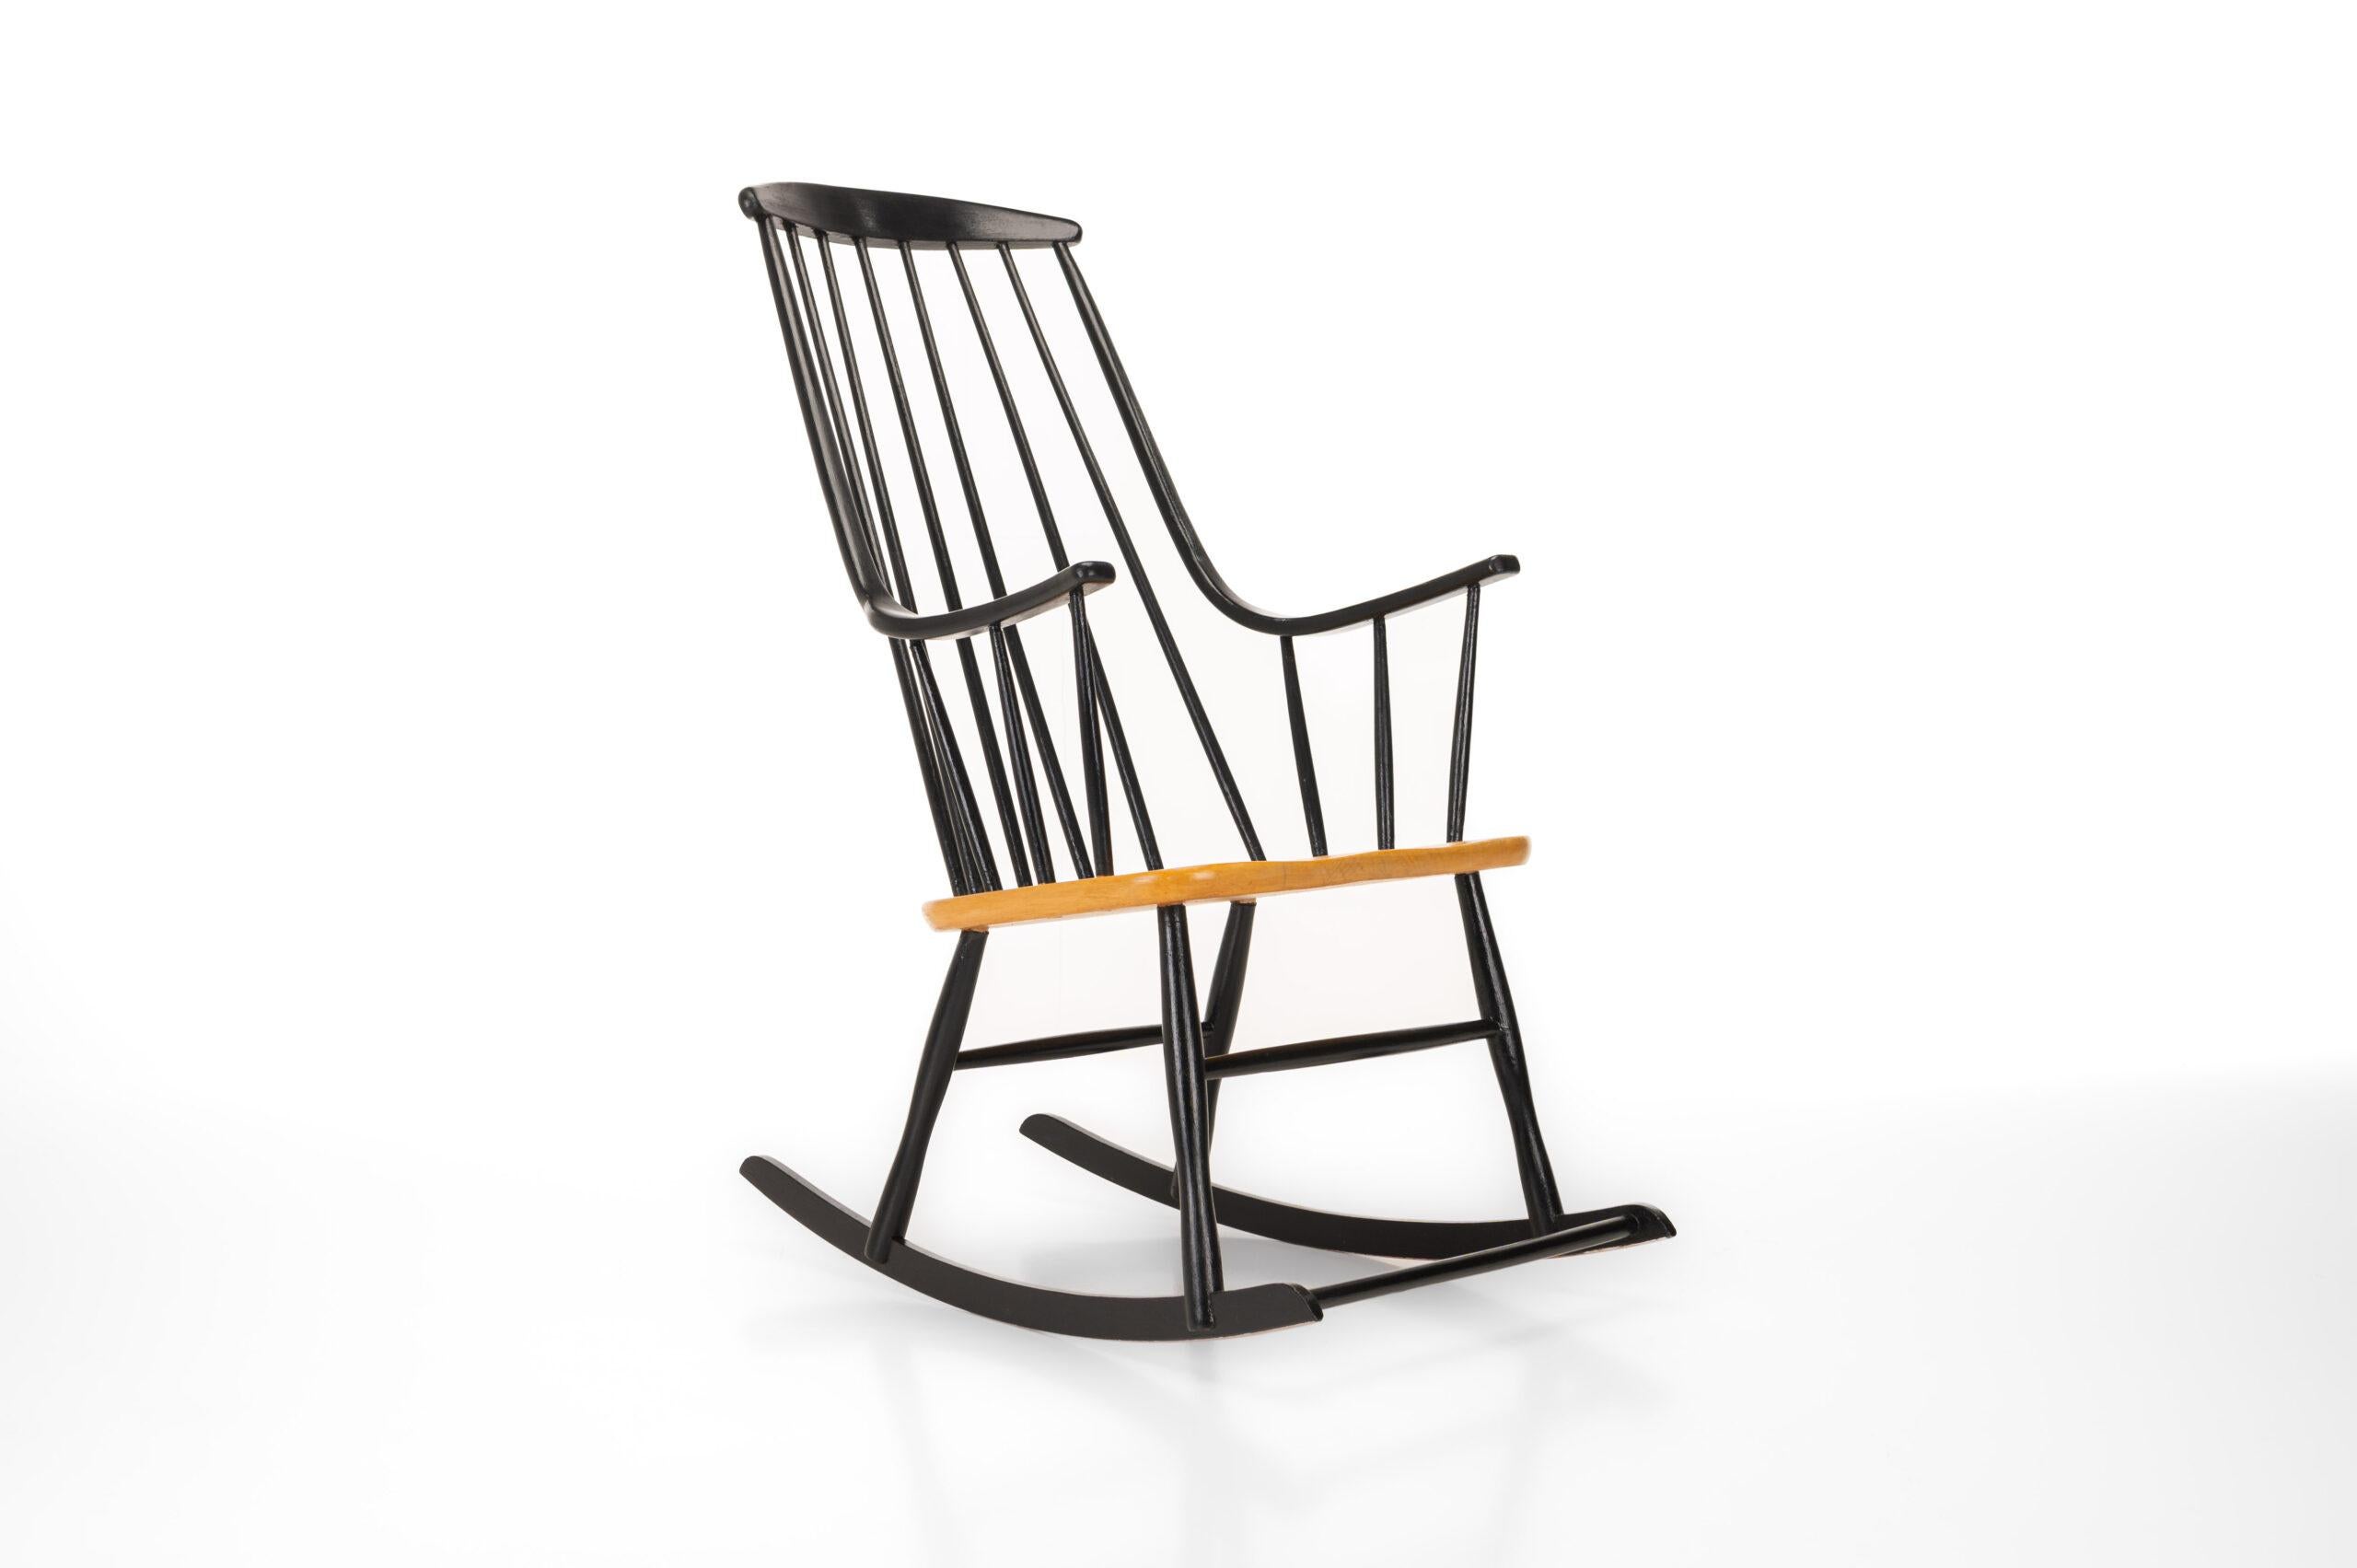 Wood Vintage Rocking Chair by Lena Larsson for Nesto, Sweden, 1950s